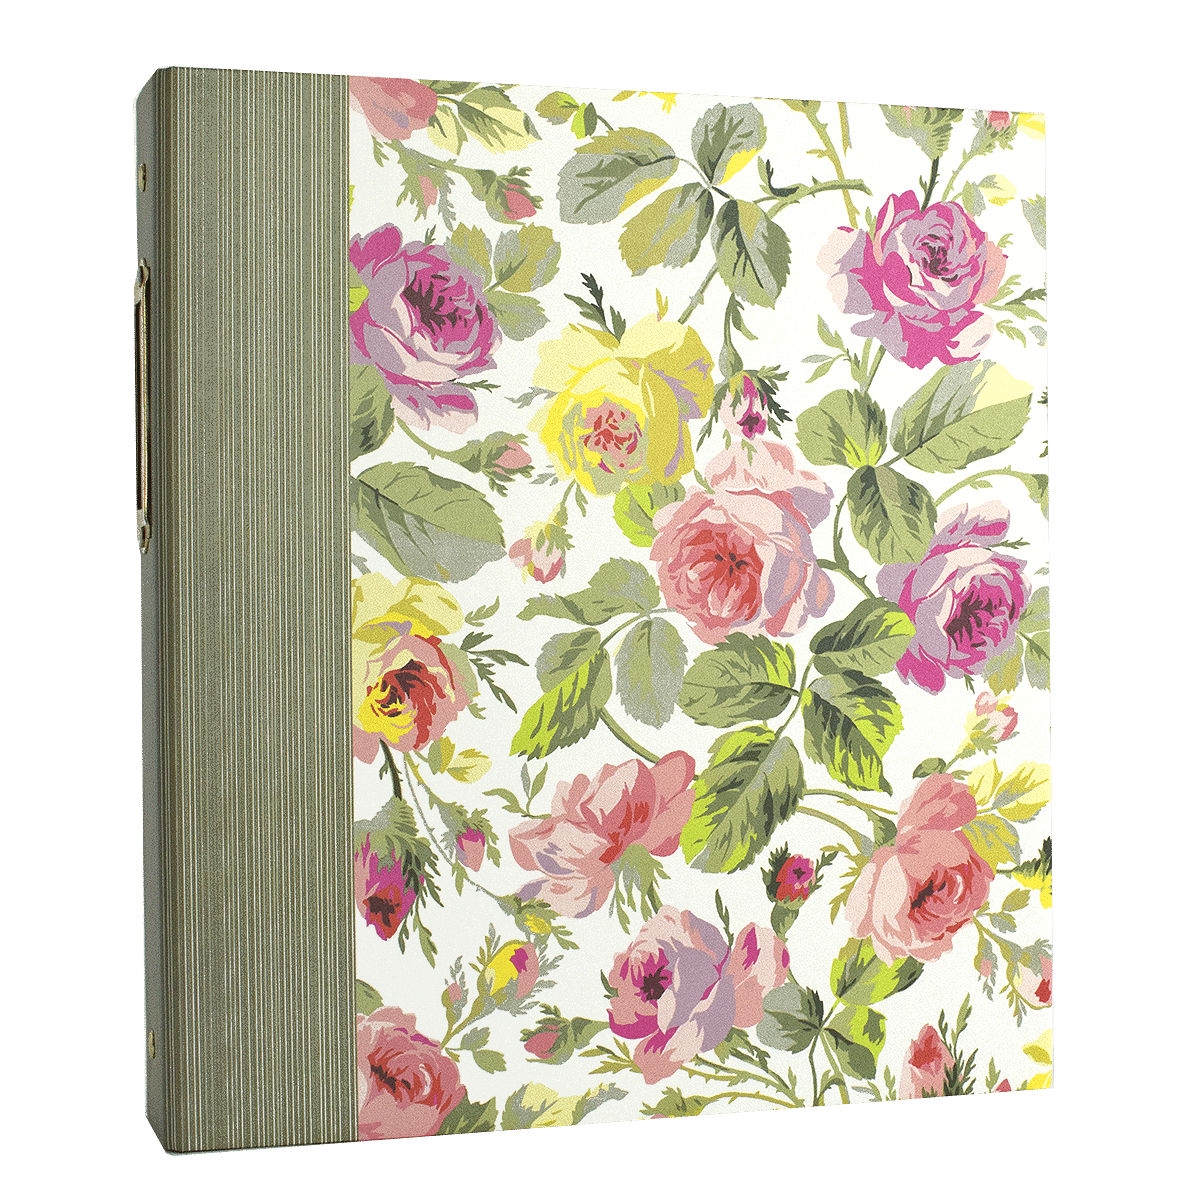 a book with a floral pattern on it.